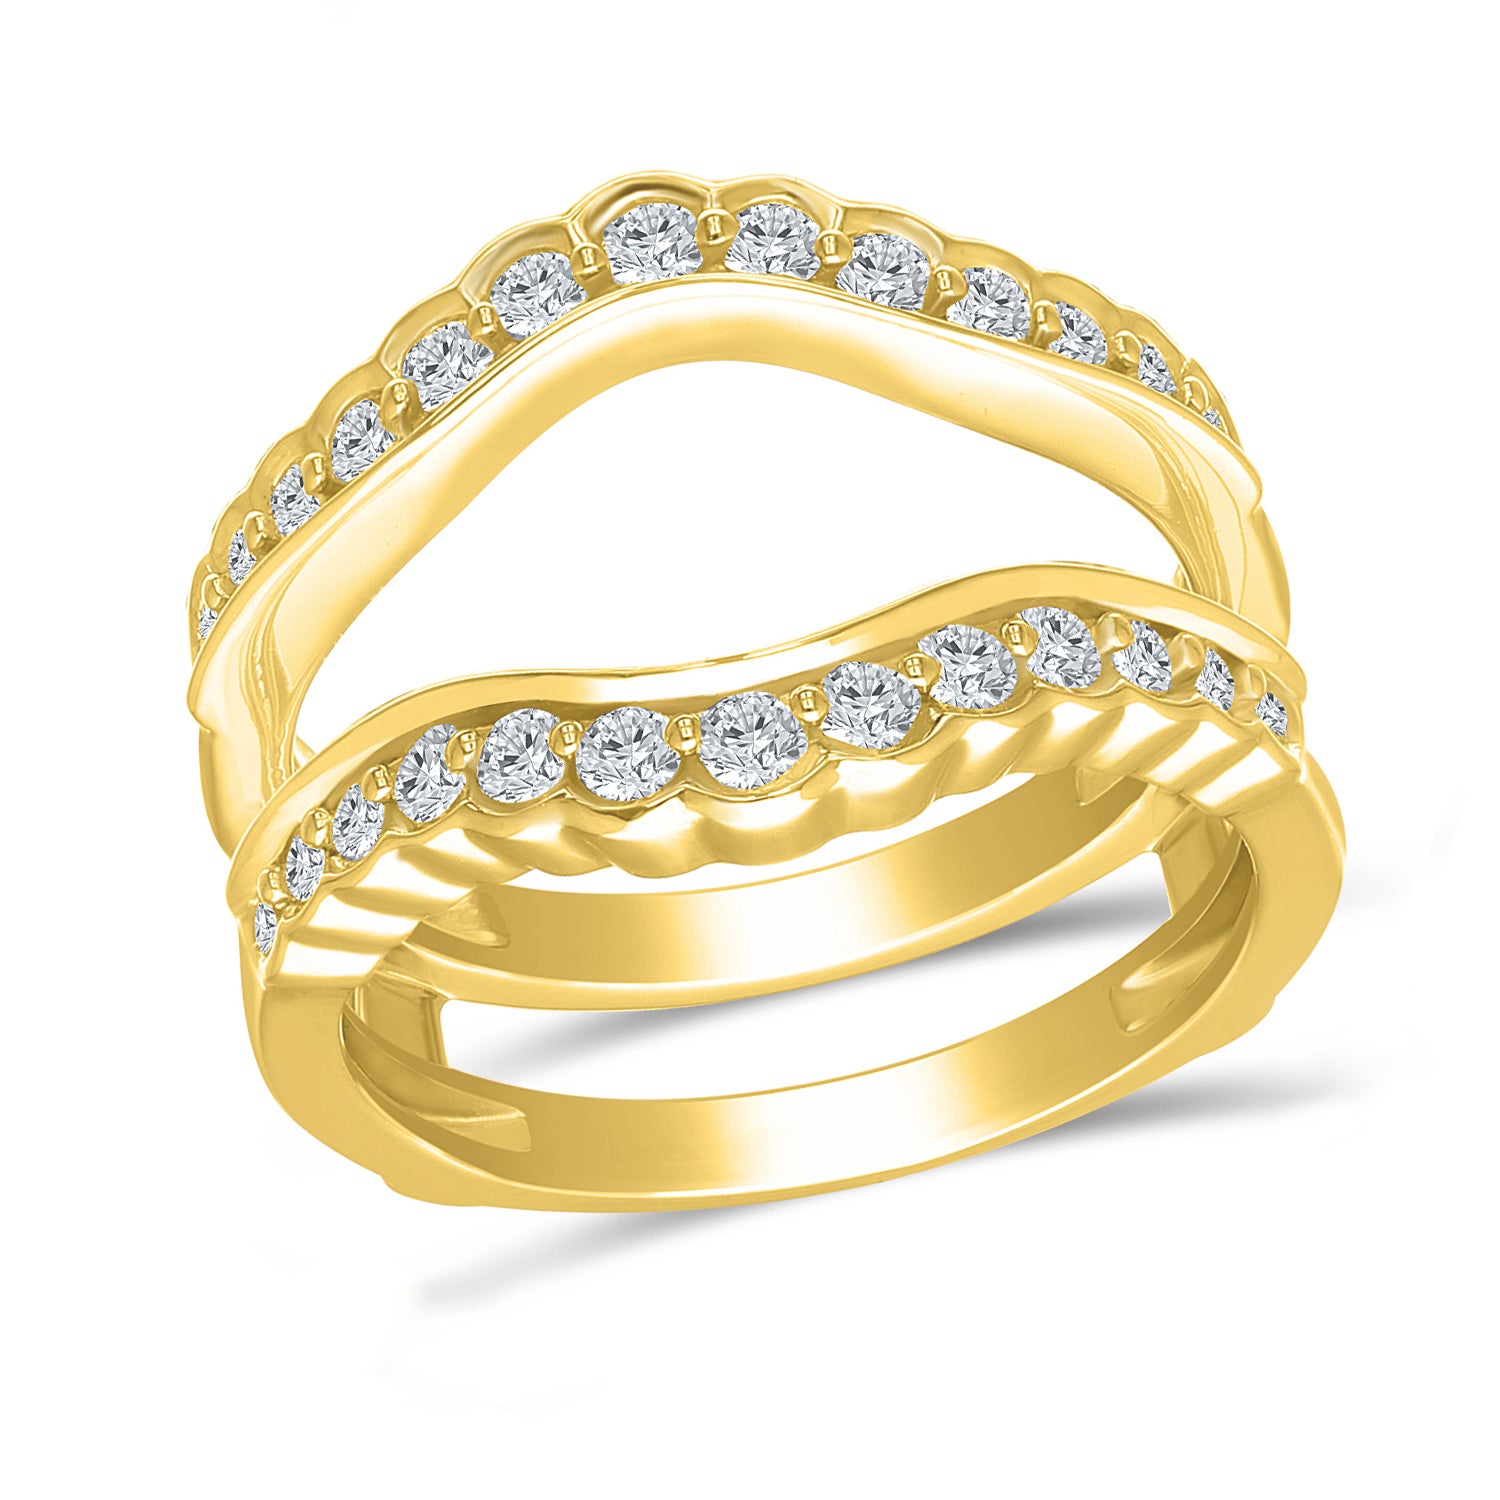 1/4ctw Diamond Asymmetrical Floral Yellow Gold Ring Guard | REEDS Jewelers